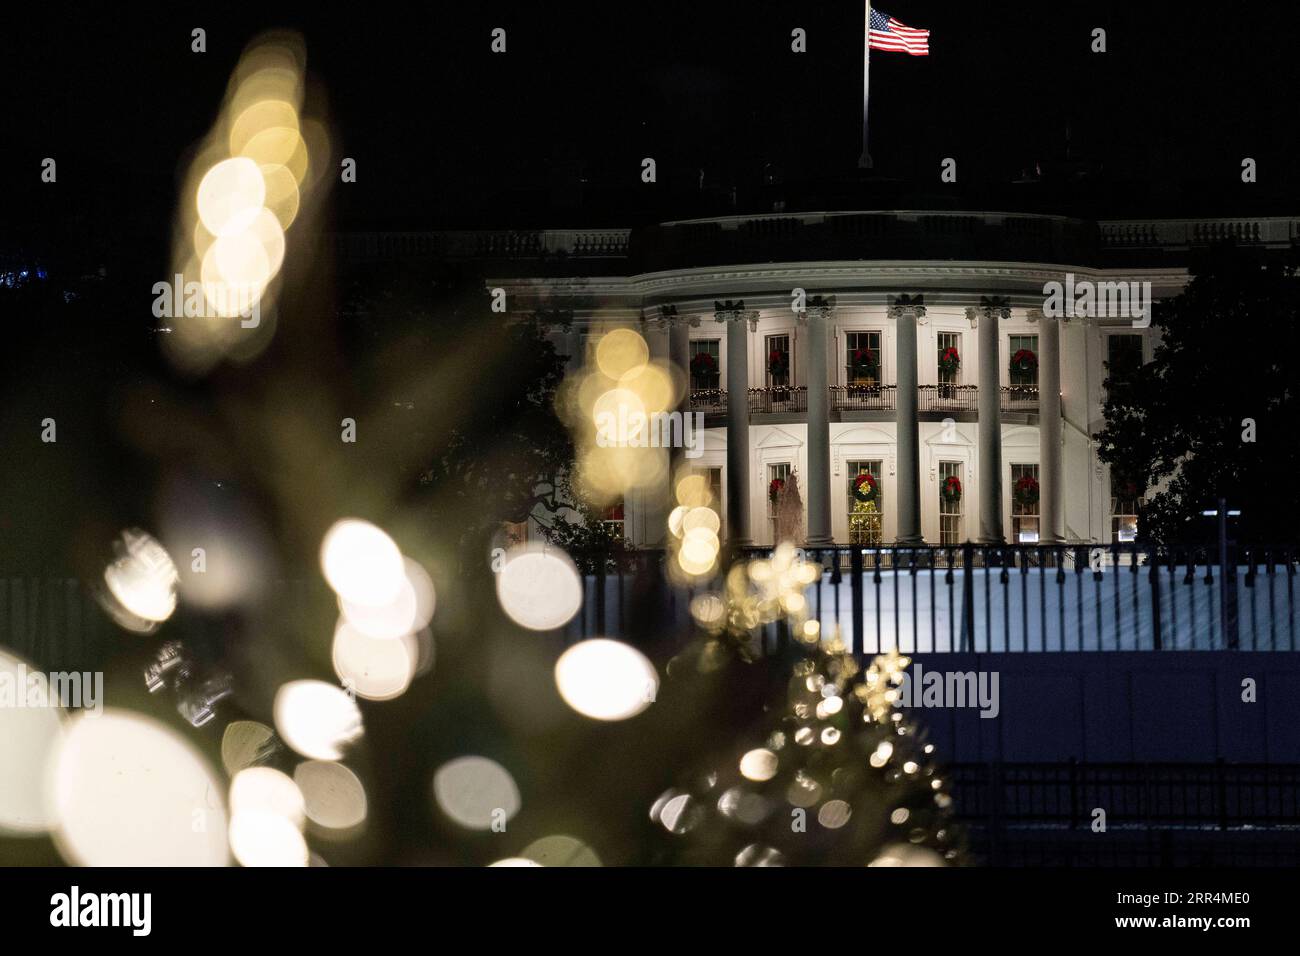 201209 -- BEIJING, Dec. 9, 2020 -- Photo taken on Dec. 7, 2020 shows the White House and Christmas decorations in Washington, D.C., the United States. A U.S. federal judge on Monday blocked the Trump administration s ban on the popular video-sharing app TikTok, the latest defeat in the administration s clamp down on the app.  XINHUA PHOTOS OF THE DAY LiuxJie PUBLICATIONxNOTxINxCHN Stock Photo